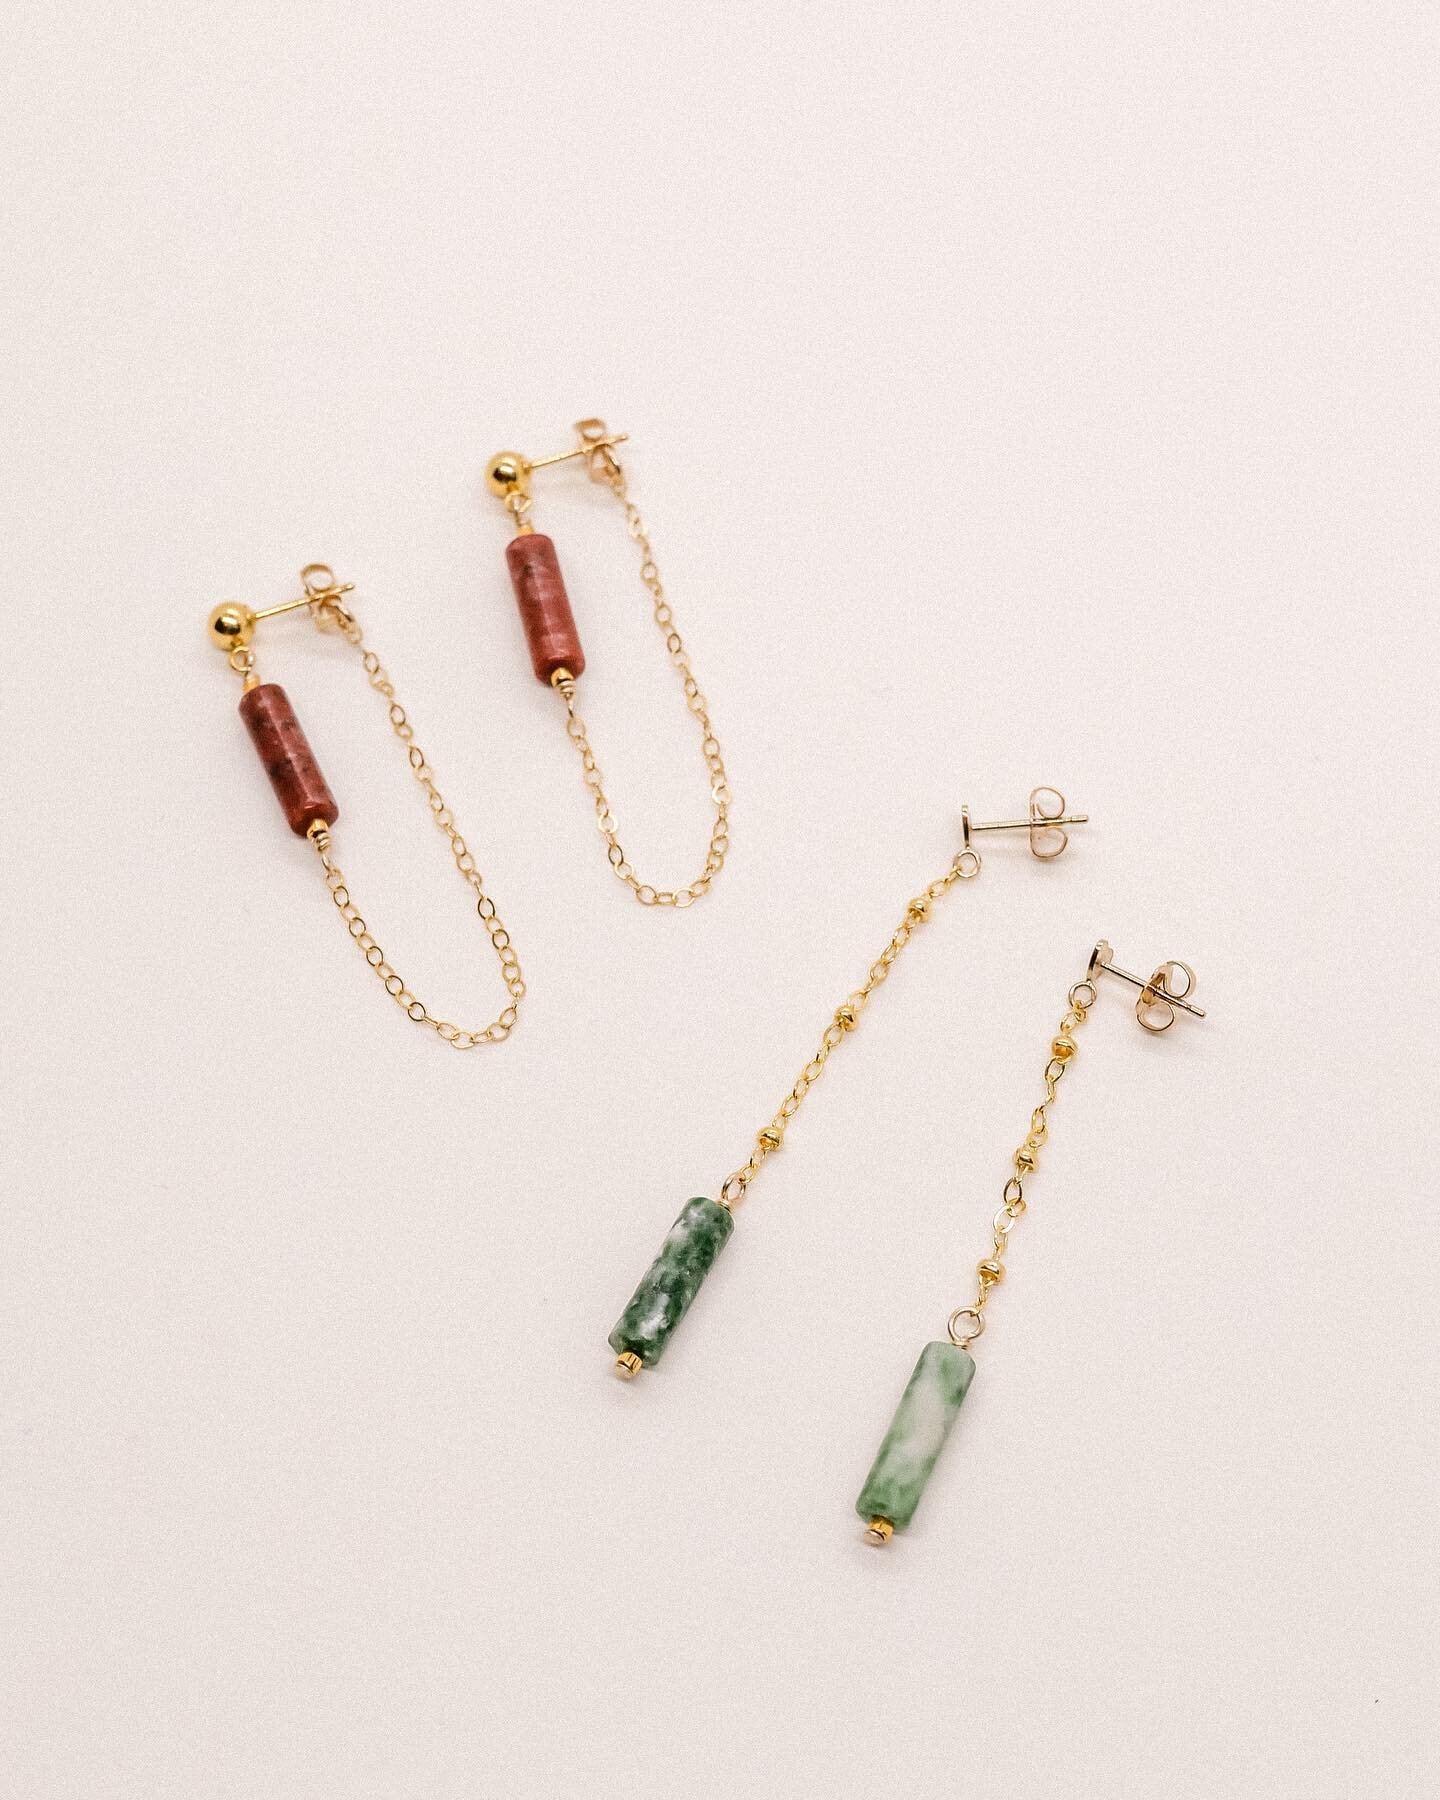 It&rsquo;s giving subtle holiday ❤️💚 New Dawn and Darlene earrings, perfect for this holiday season and beyond #clemaeve